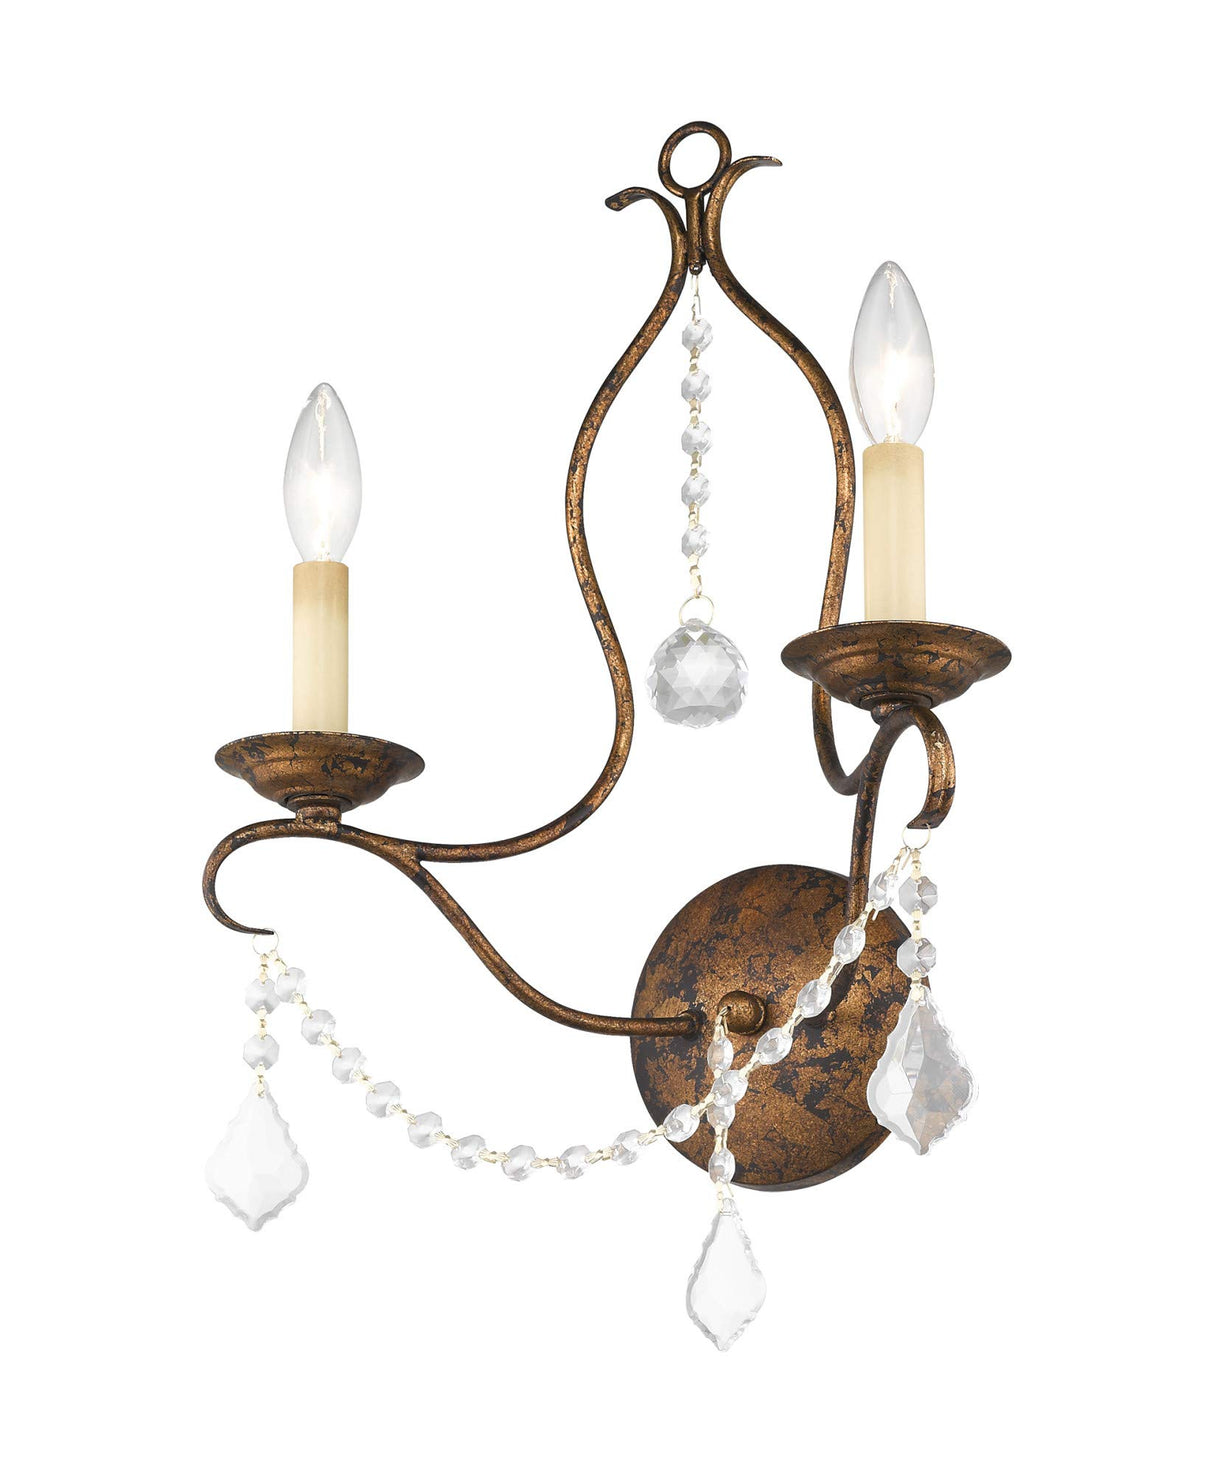 Livex Lighting 6422-48 Chesterfield 2 Light Wall Sconce, Antique Gold Leaf